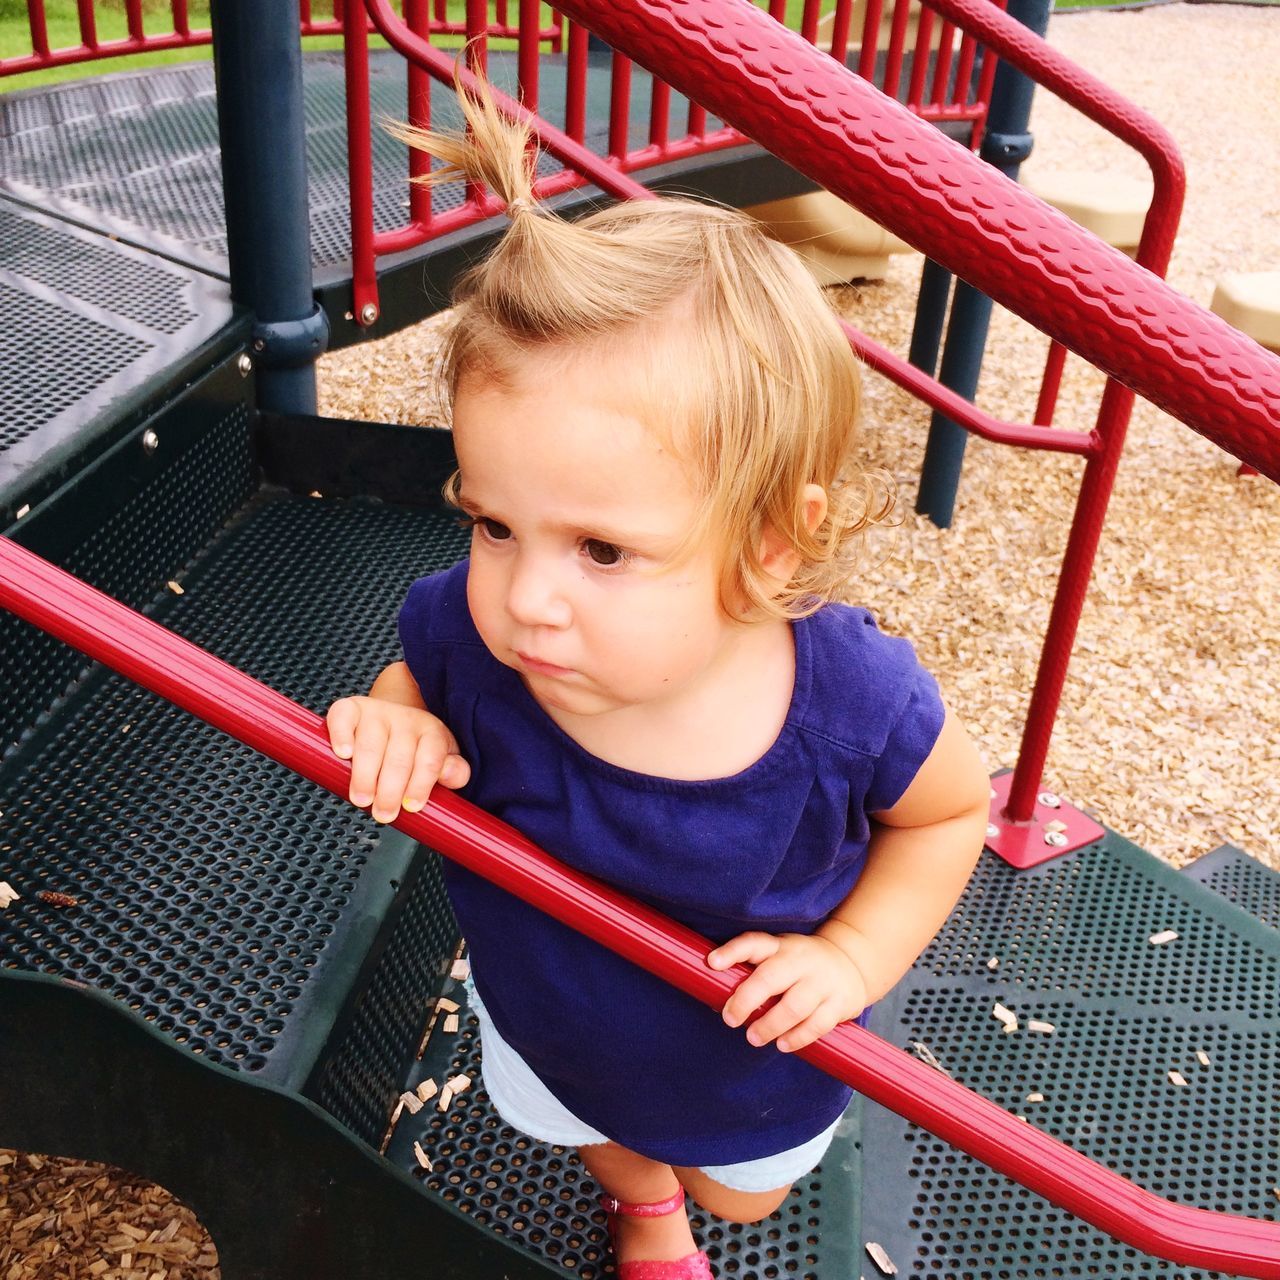 childhood, elementary age, person, innocence, cute, girls, boys, casual clothing, lifestyles, leisure activity, preschool age, sitting, playground, looking at camera, toddler, high angle view, front view, playing